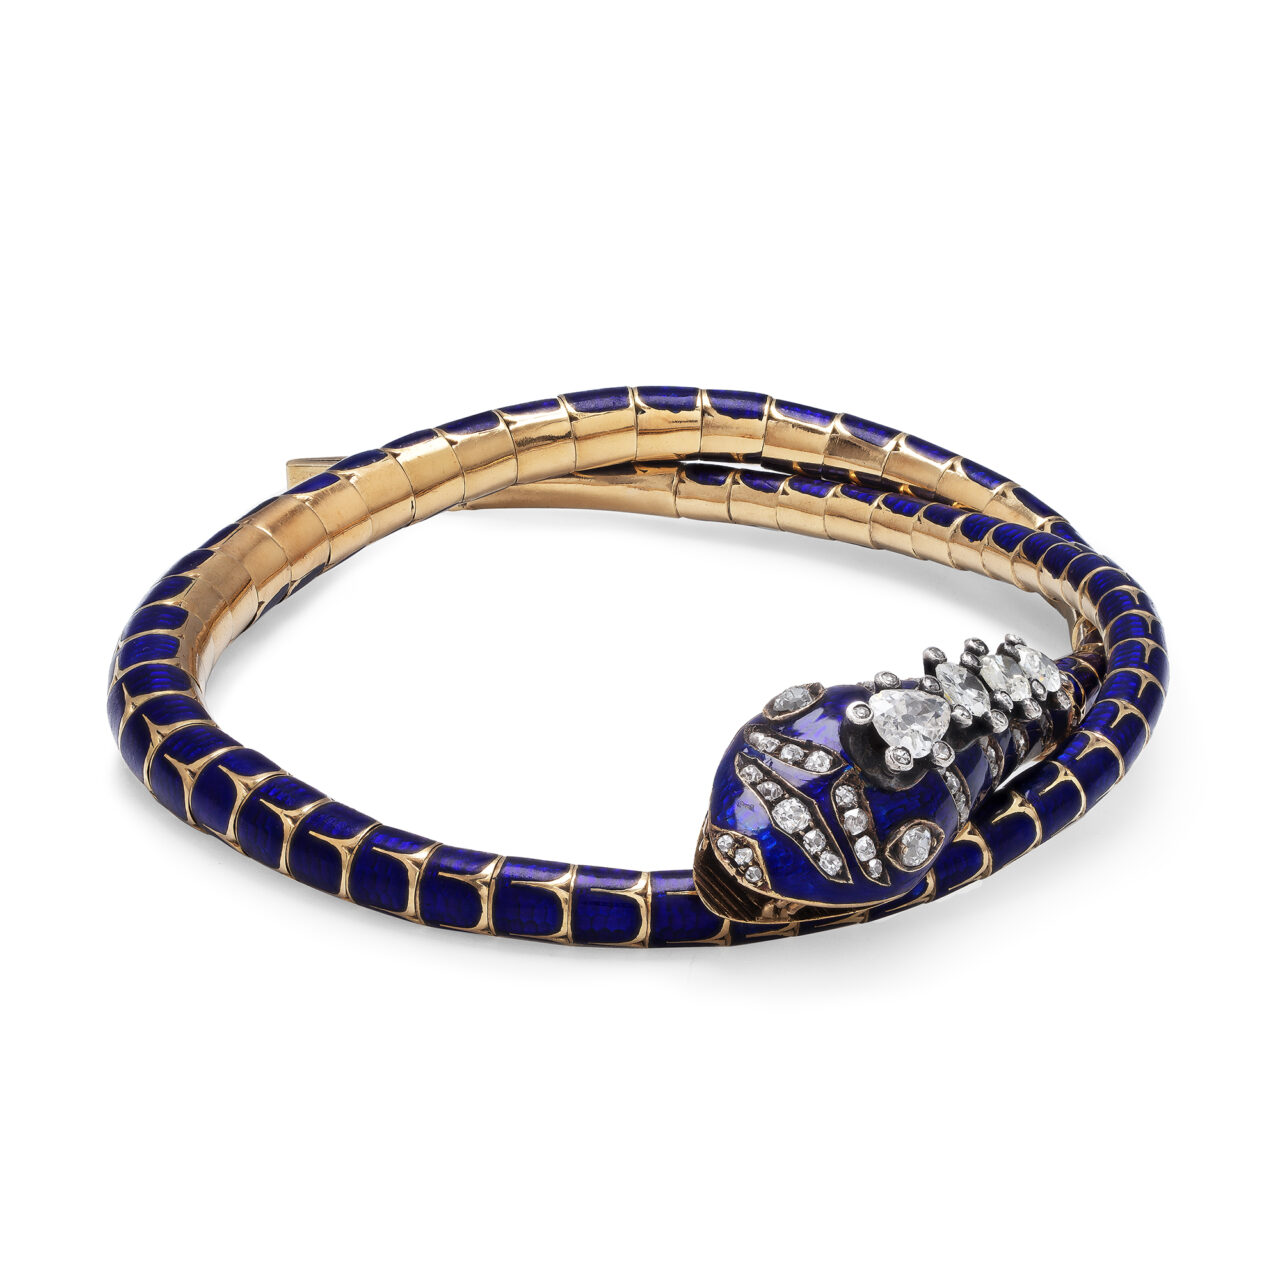 Half 800 yellow gold necklace in the shape of an enamelled snake and diamonds